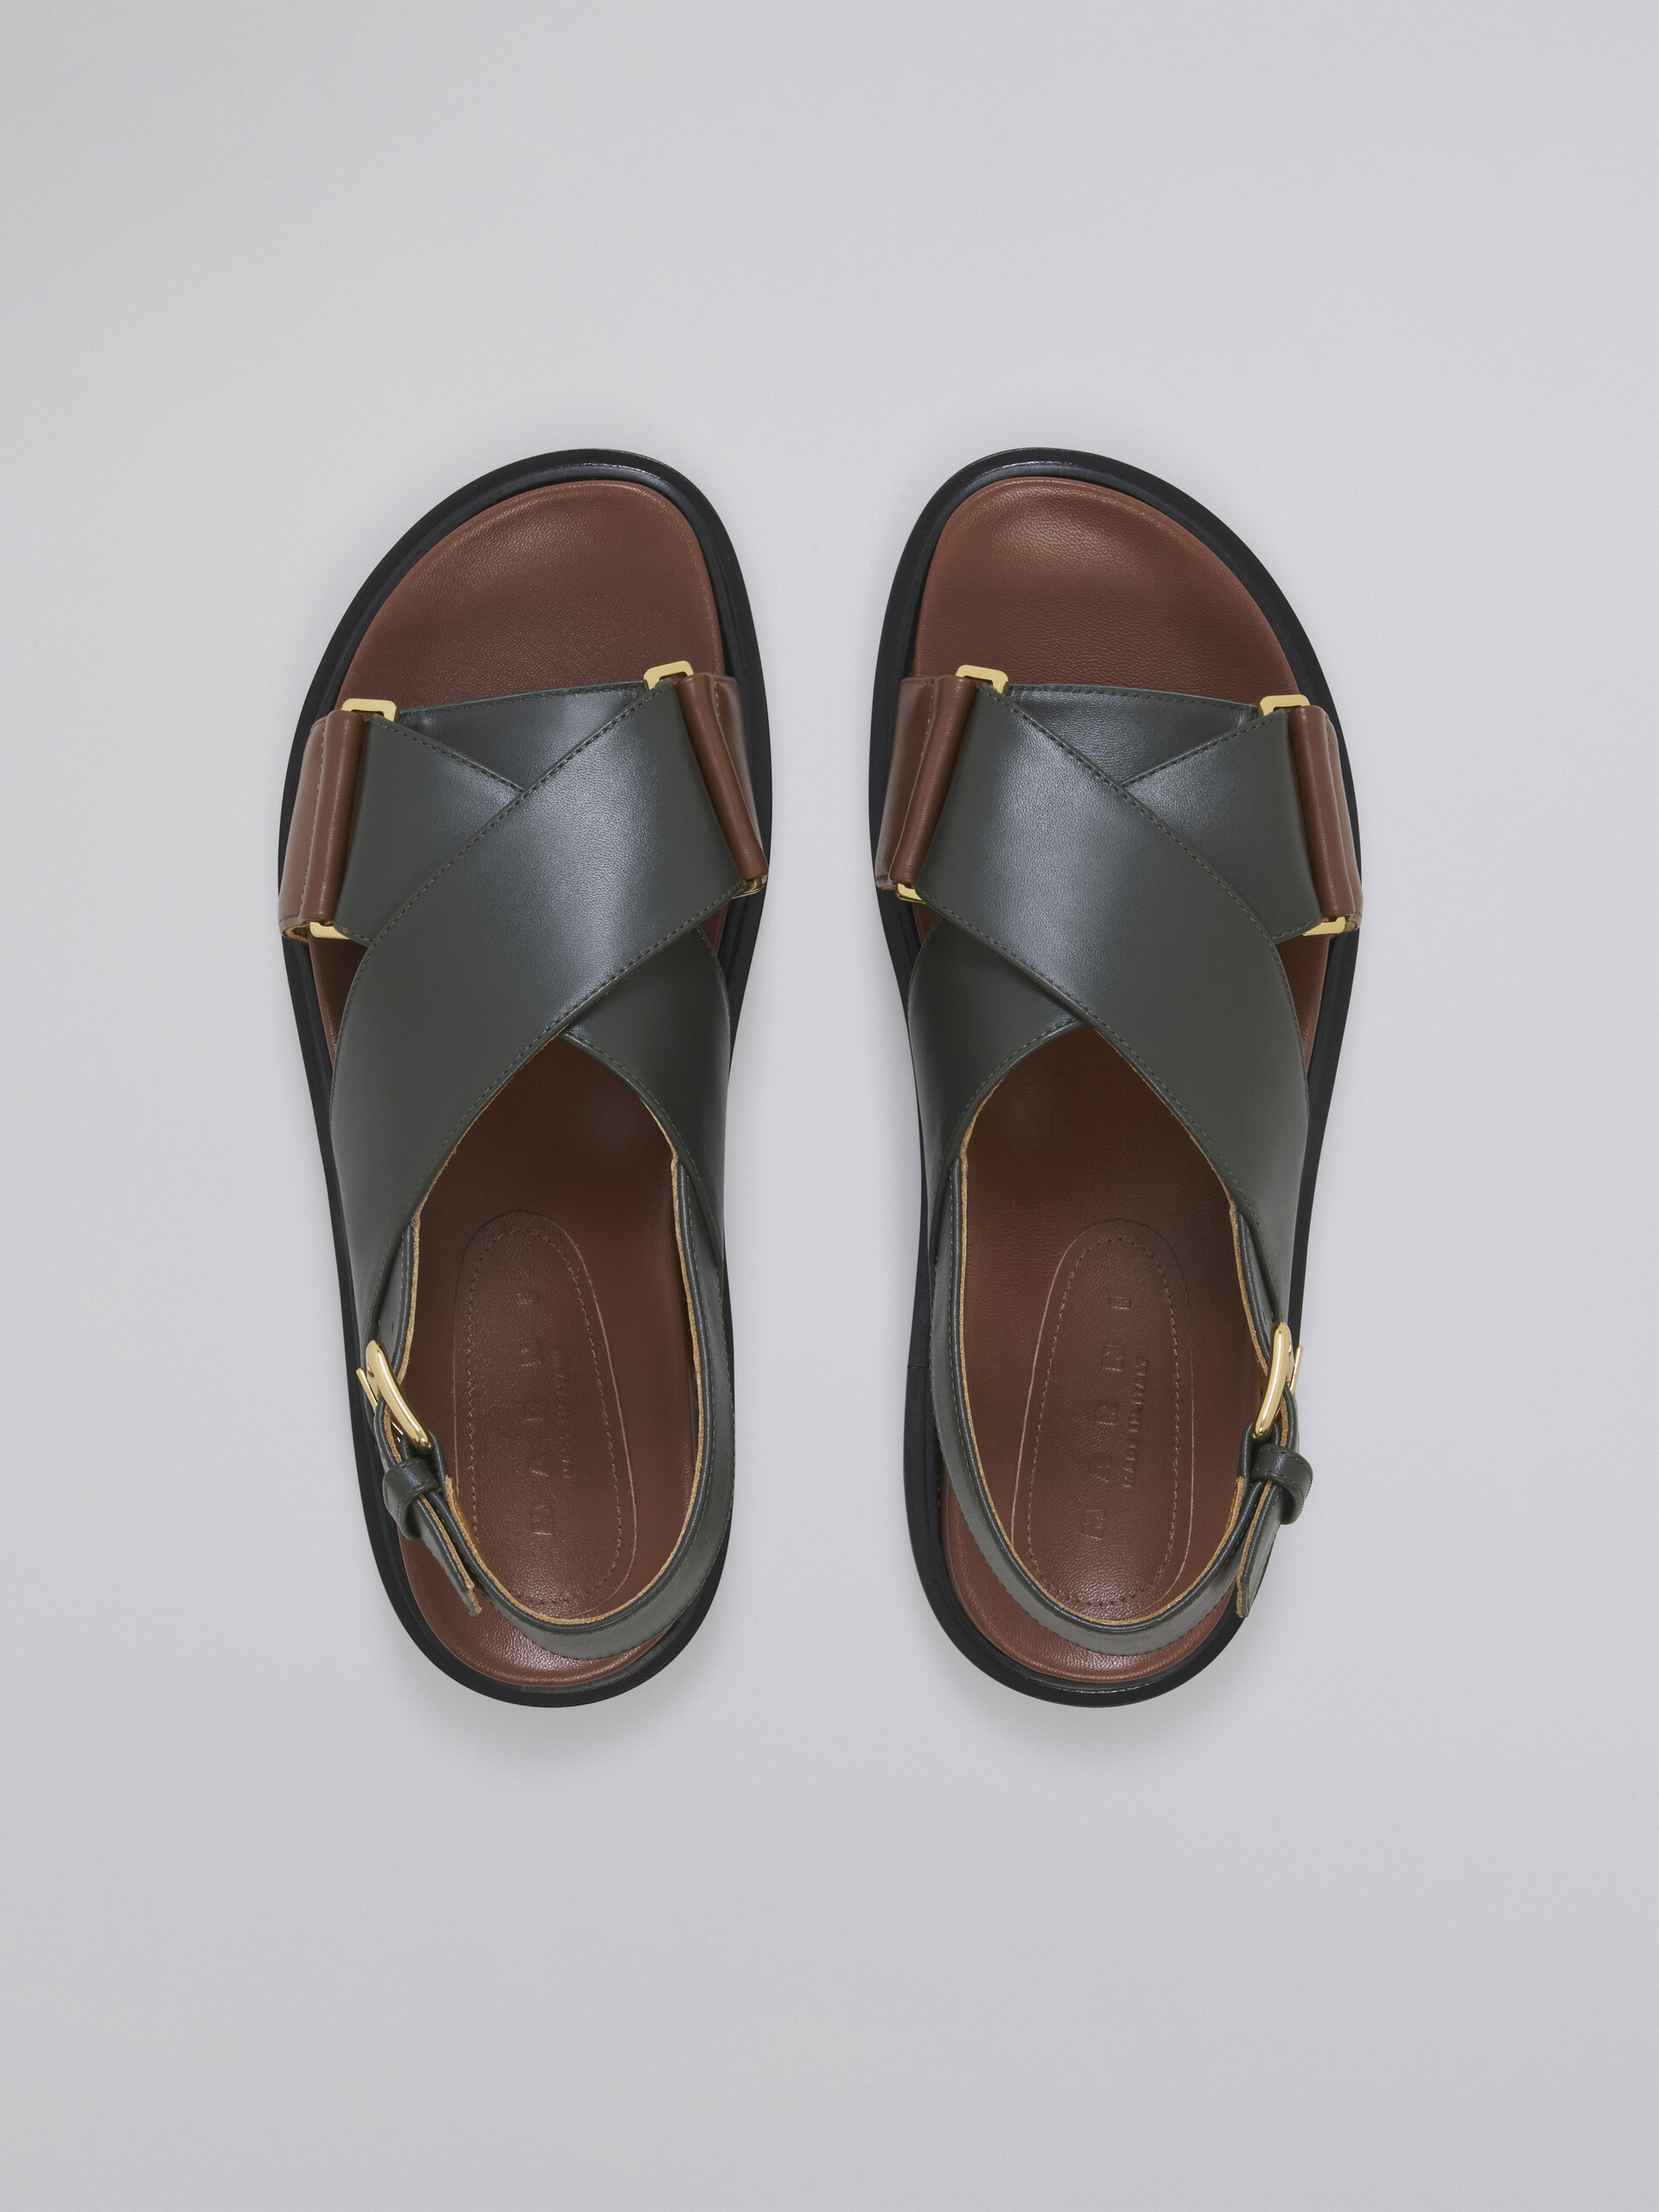 Black and brown leather Fussbett - Sandals - Image 4